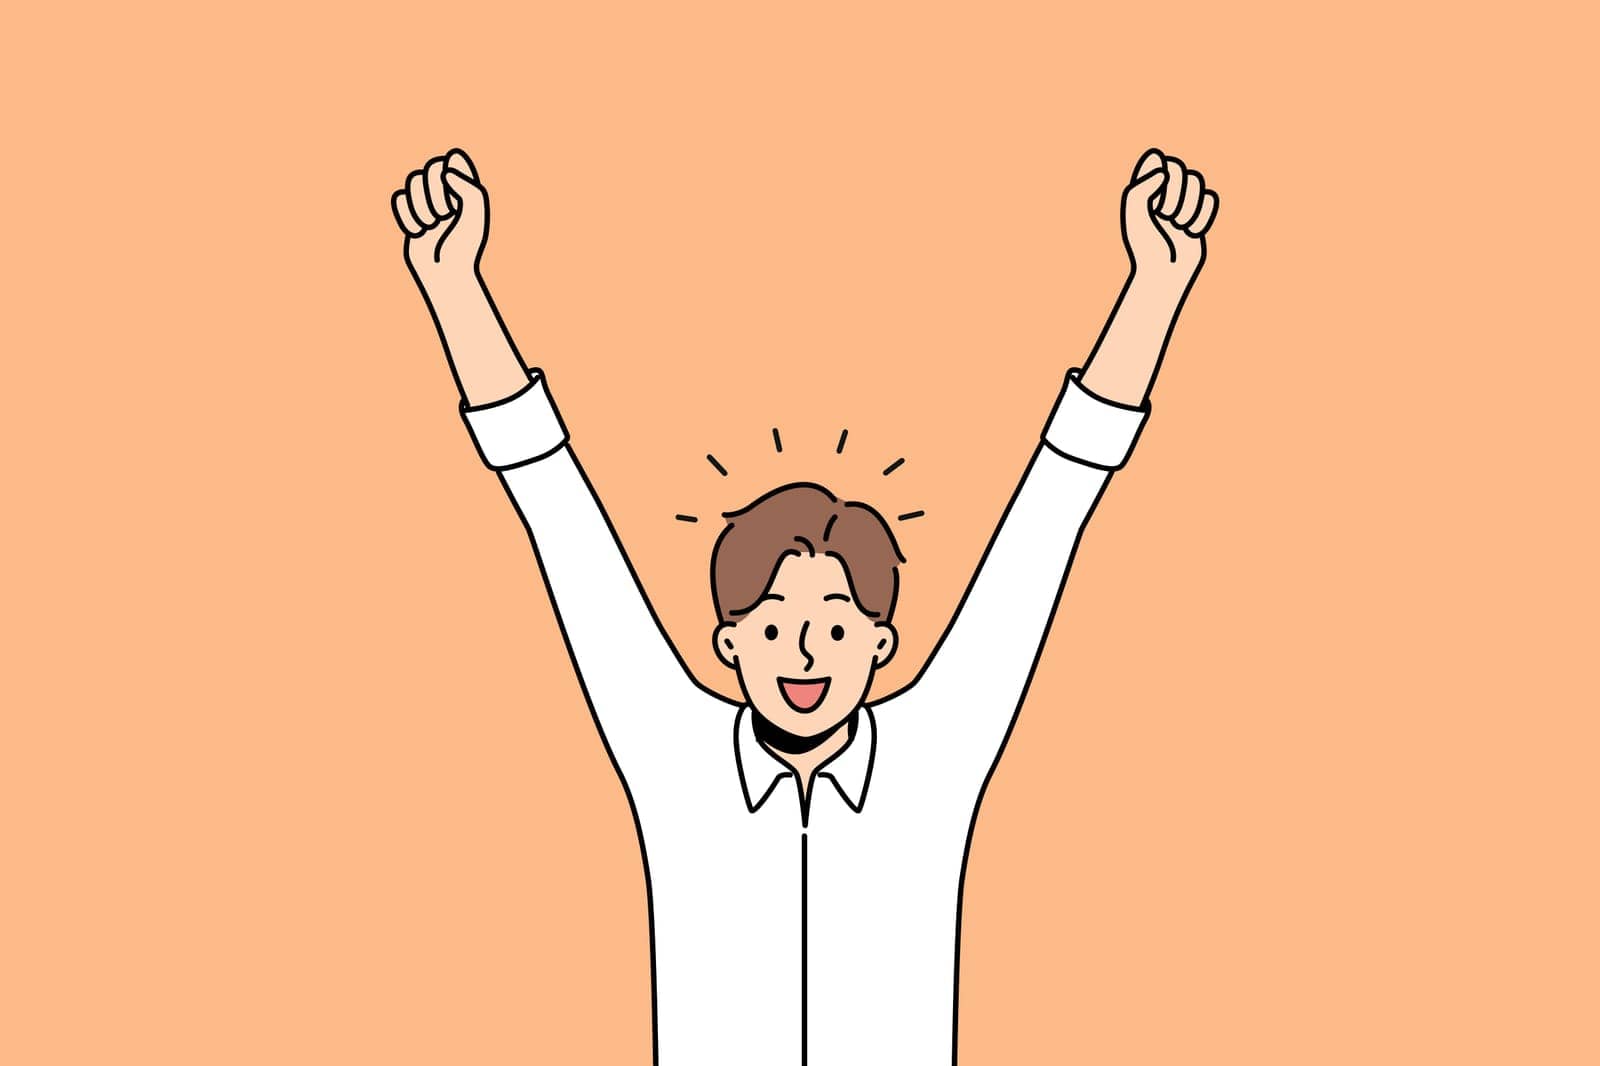 Delighted man celebrates victory by raising hands up and rejoicing in career achievements or end working day. Business man shouts with smile and is delighted with amazing news promising income growth